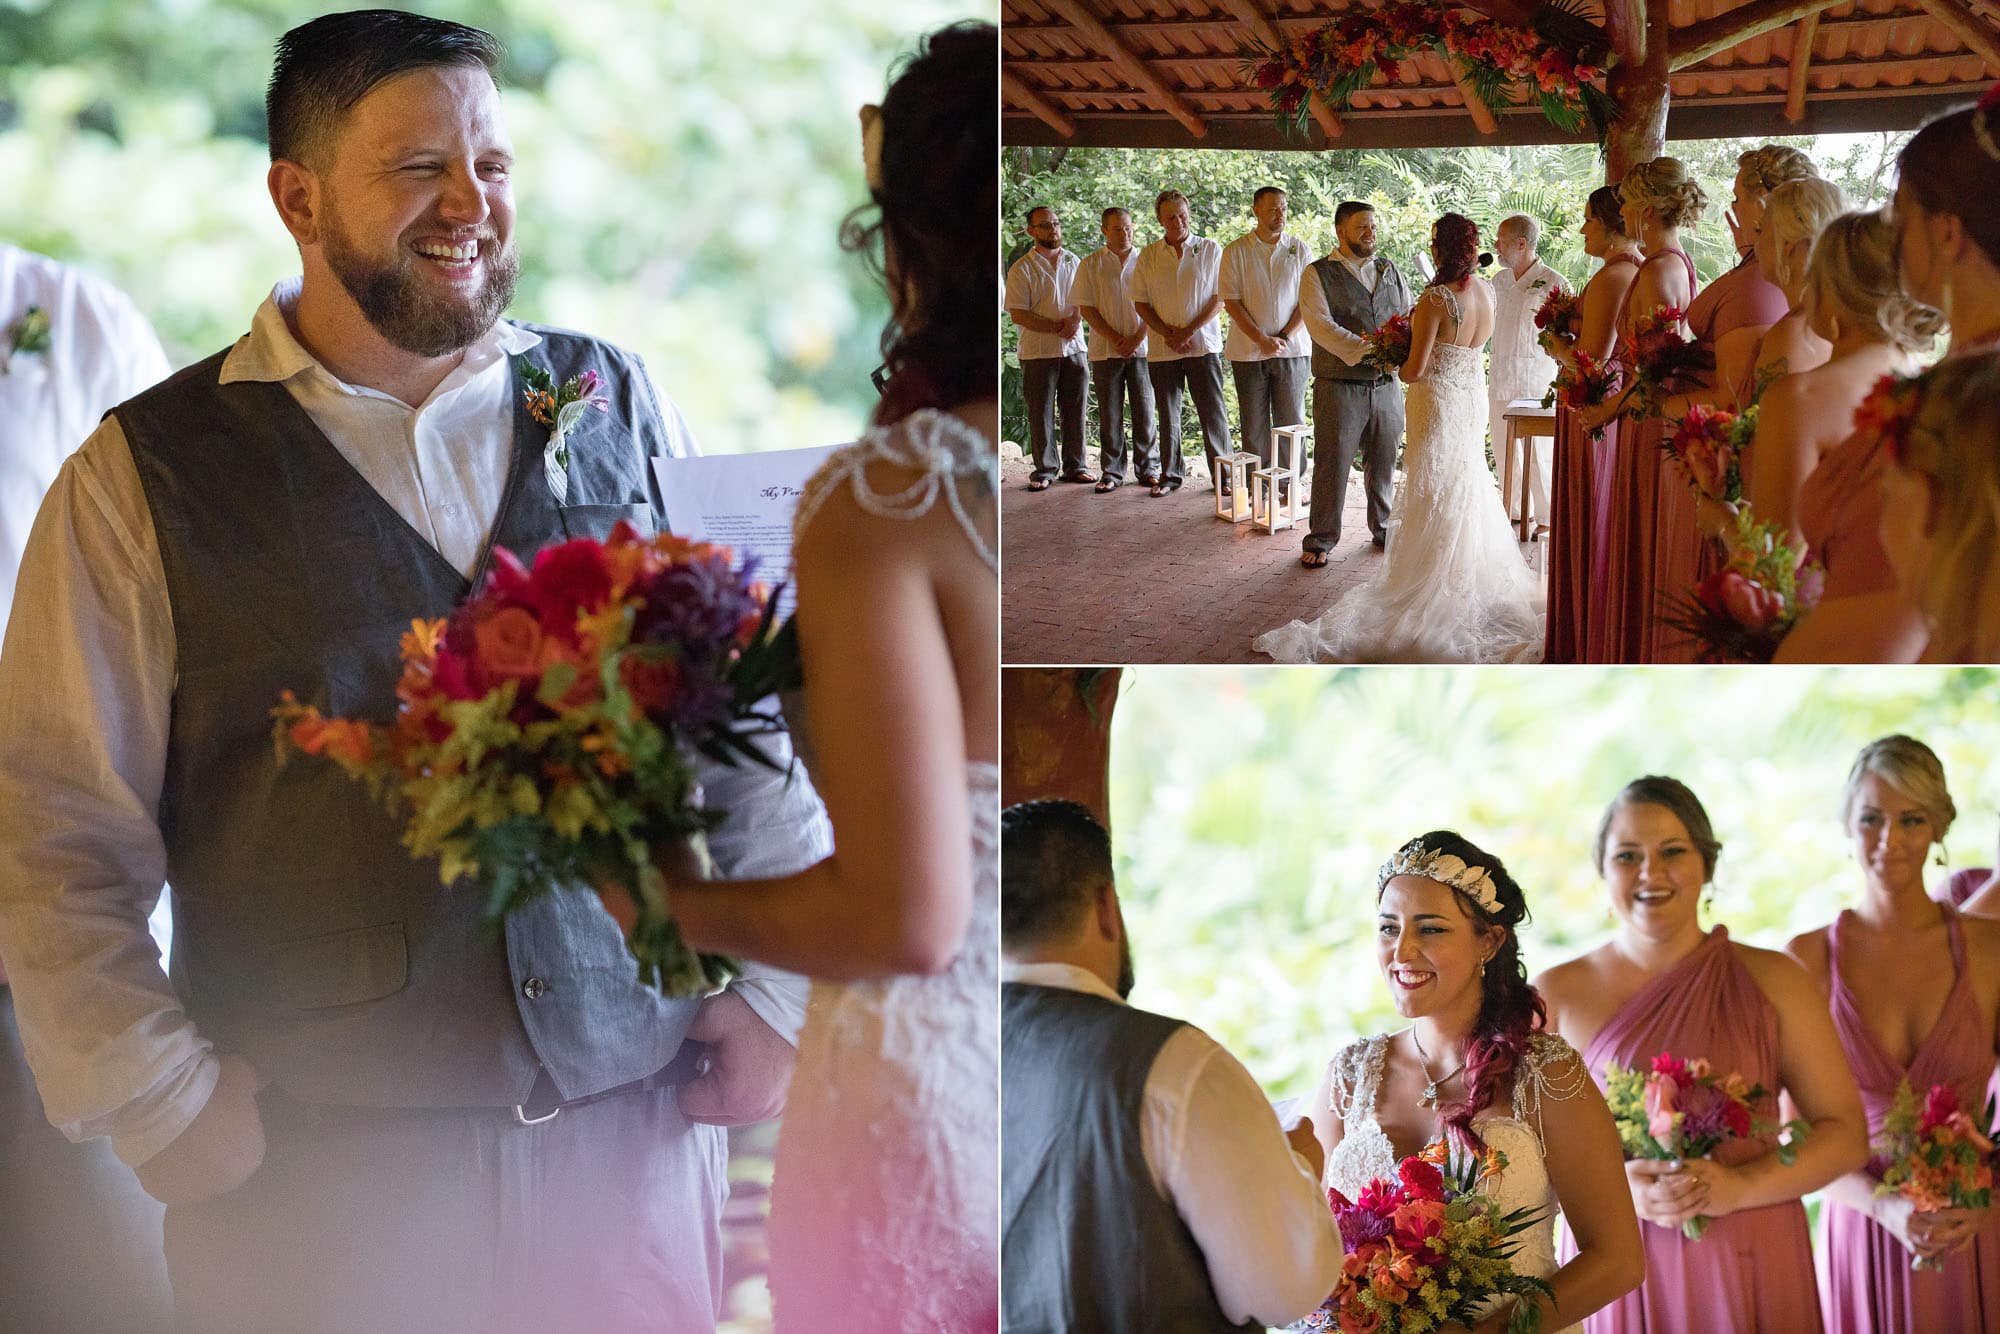 Shots from the ceremony